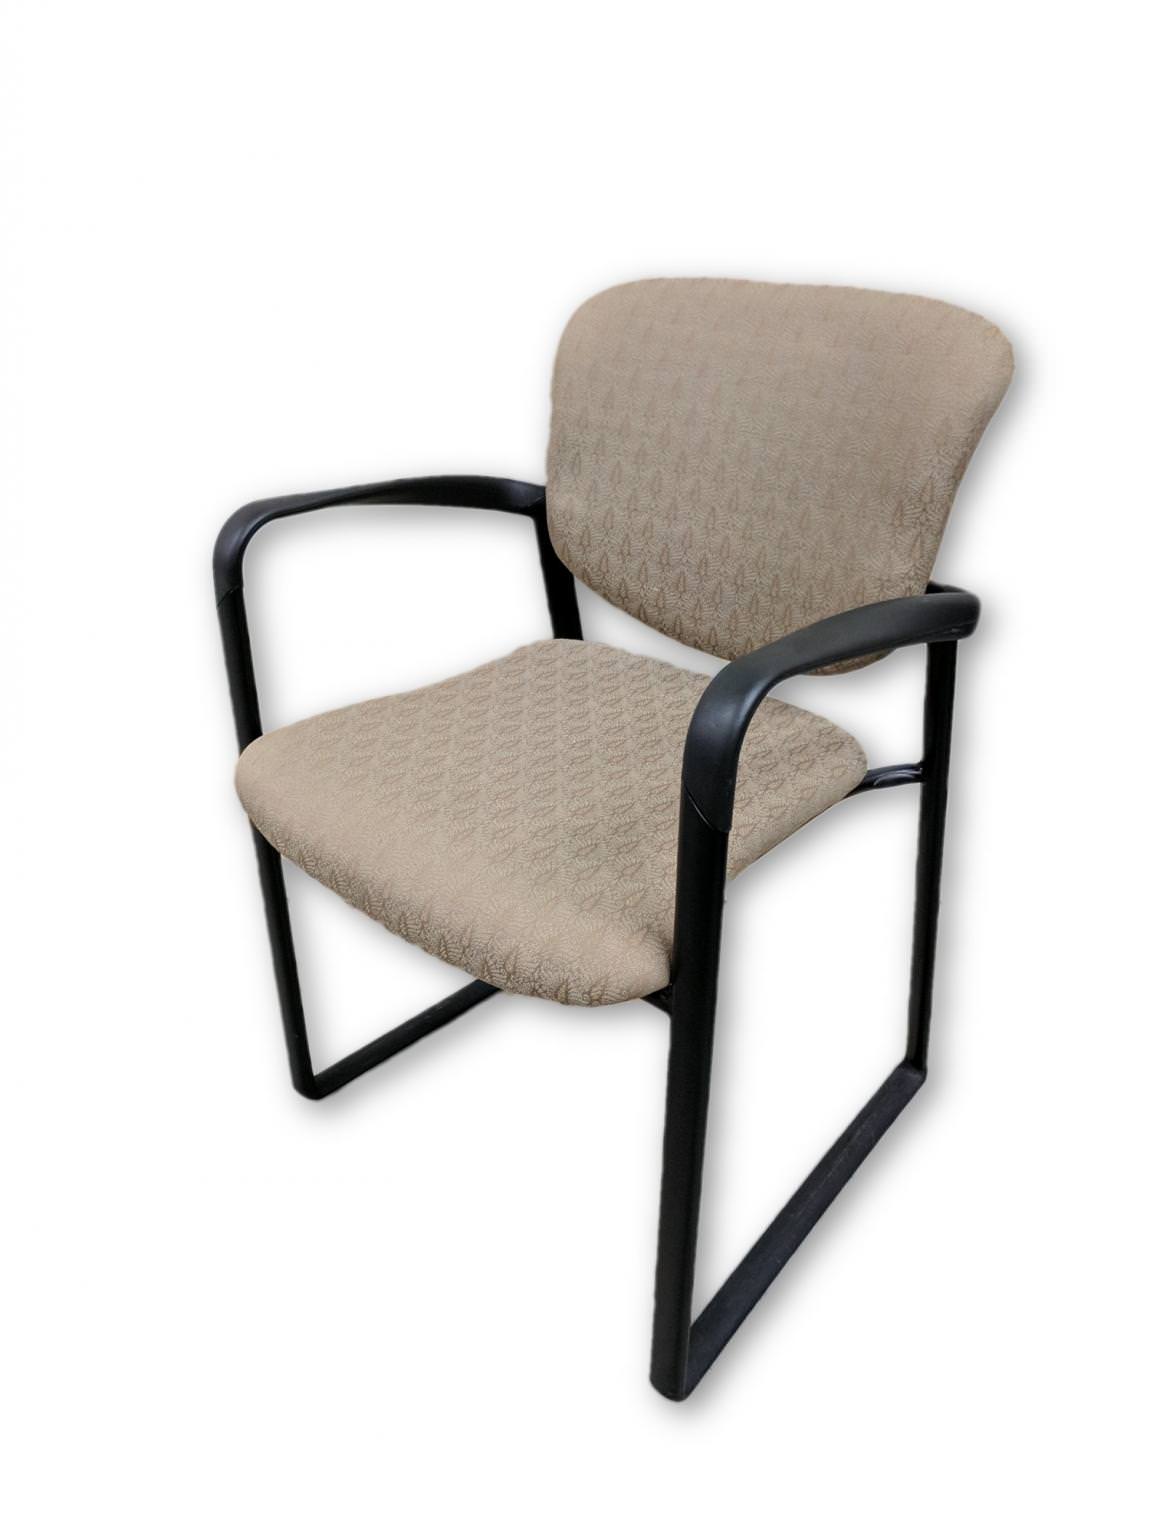 Haworth Improv Guest Chairs with Black steel frame